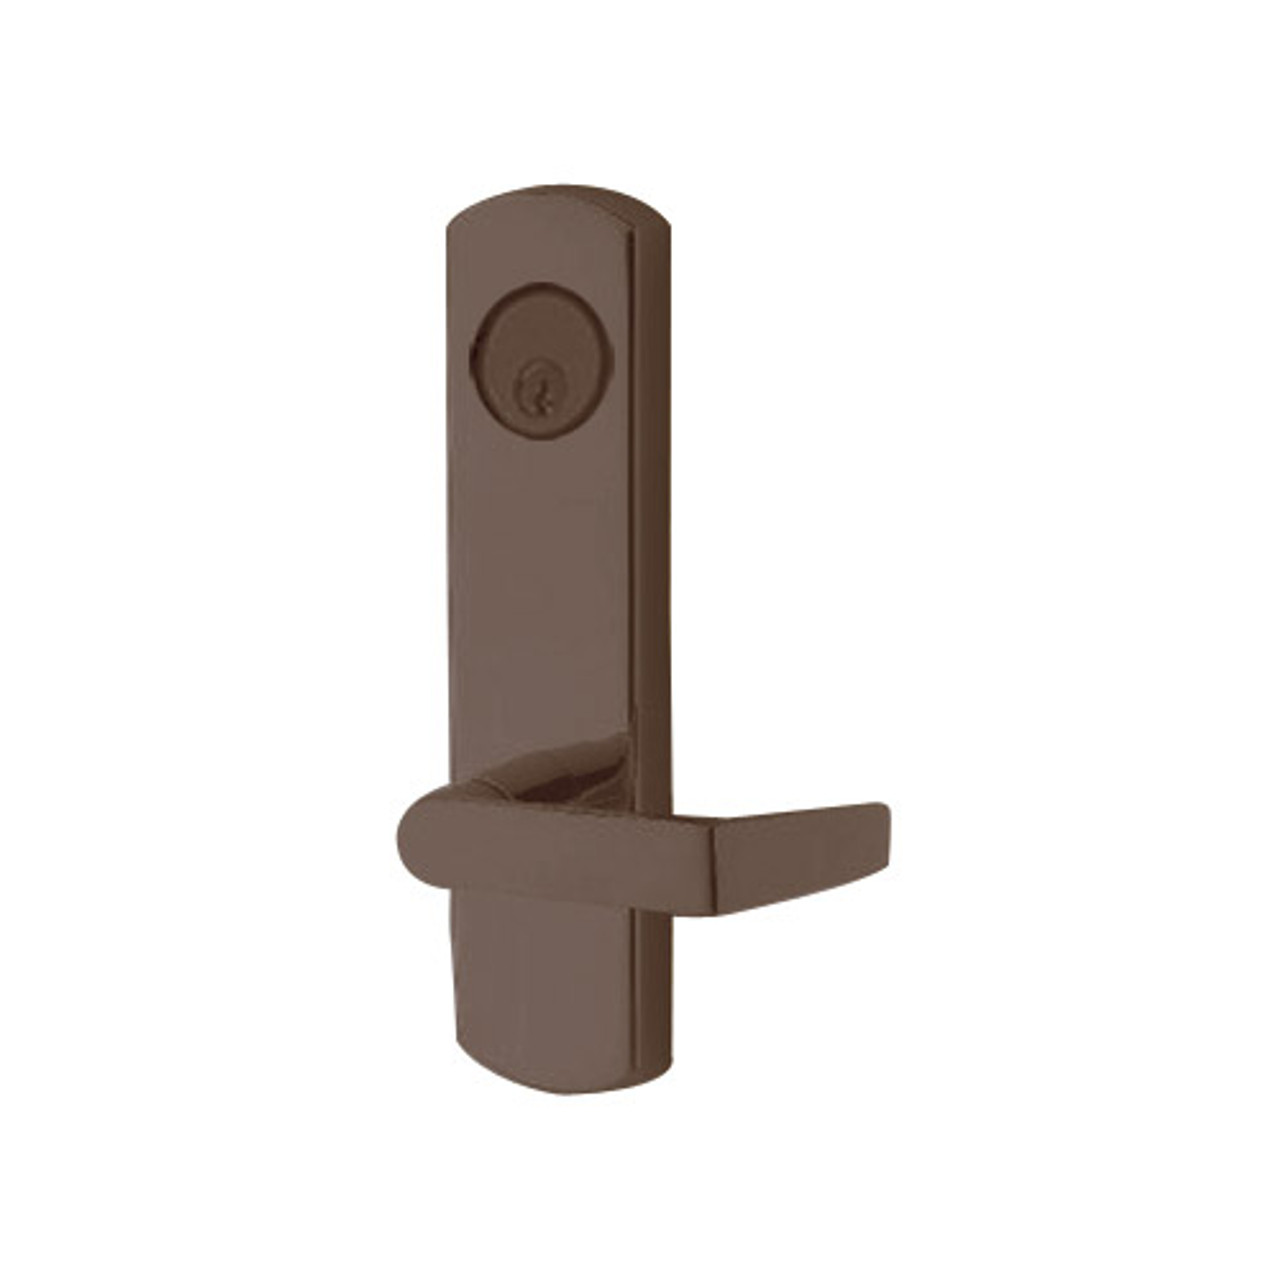 3080E-03-0-34-35 US10B Adams Rite Electrified Entry Trim with Square Lever in Oil Rubbed Bronze Finish